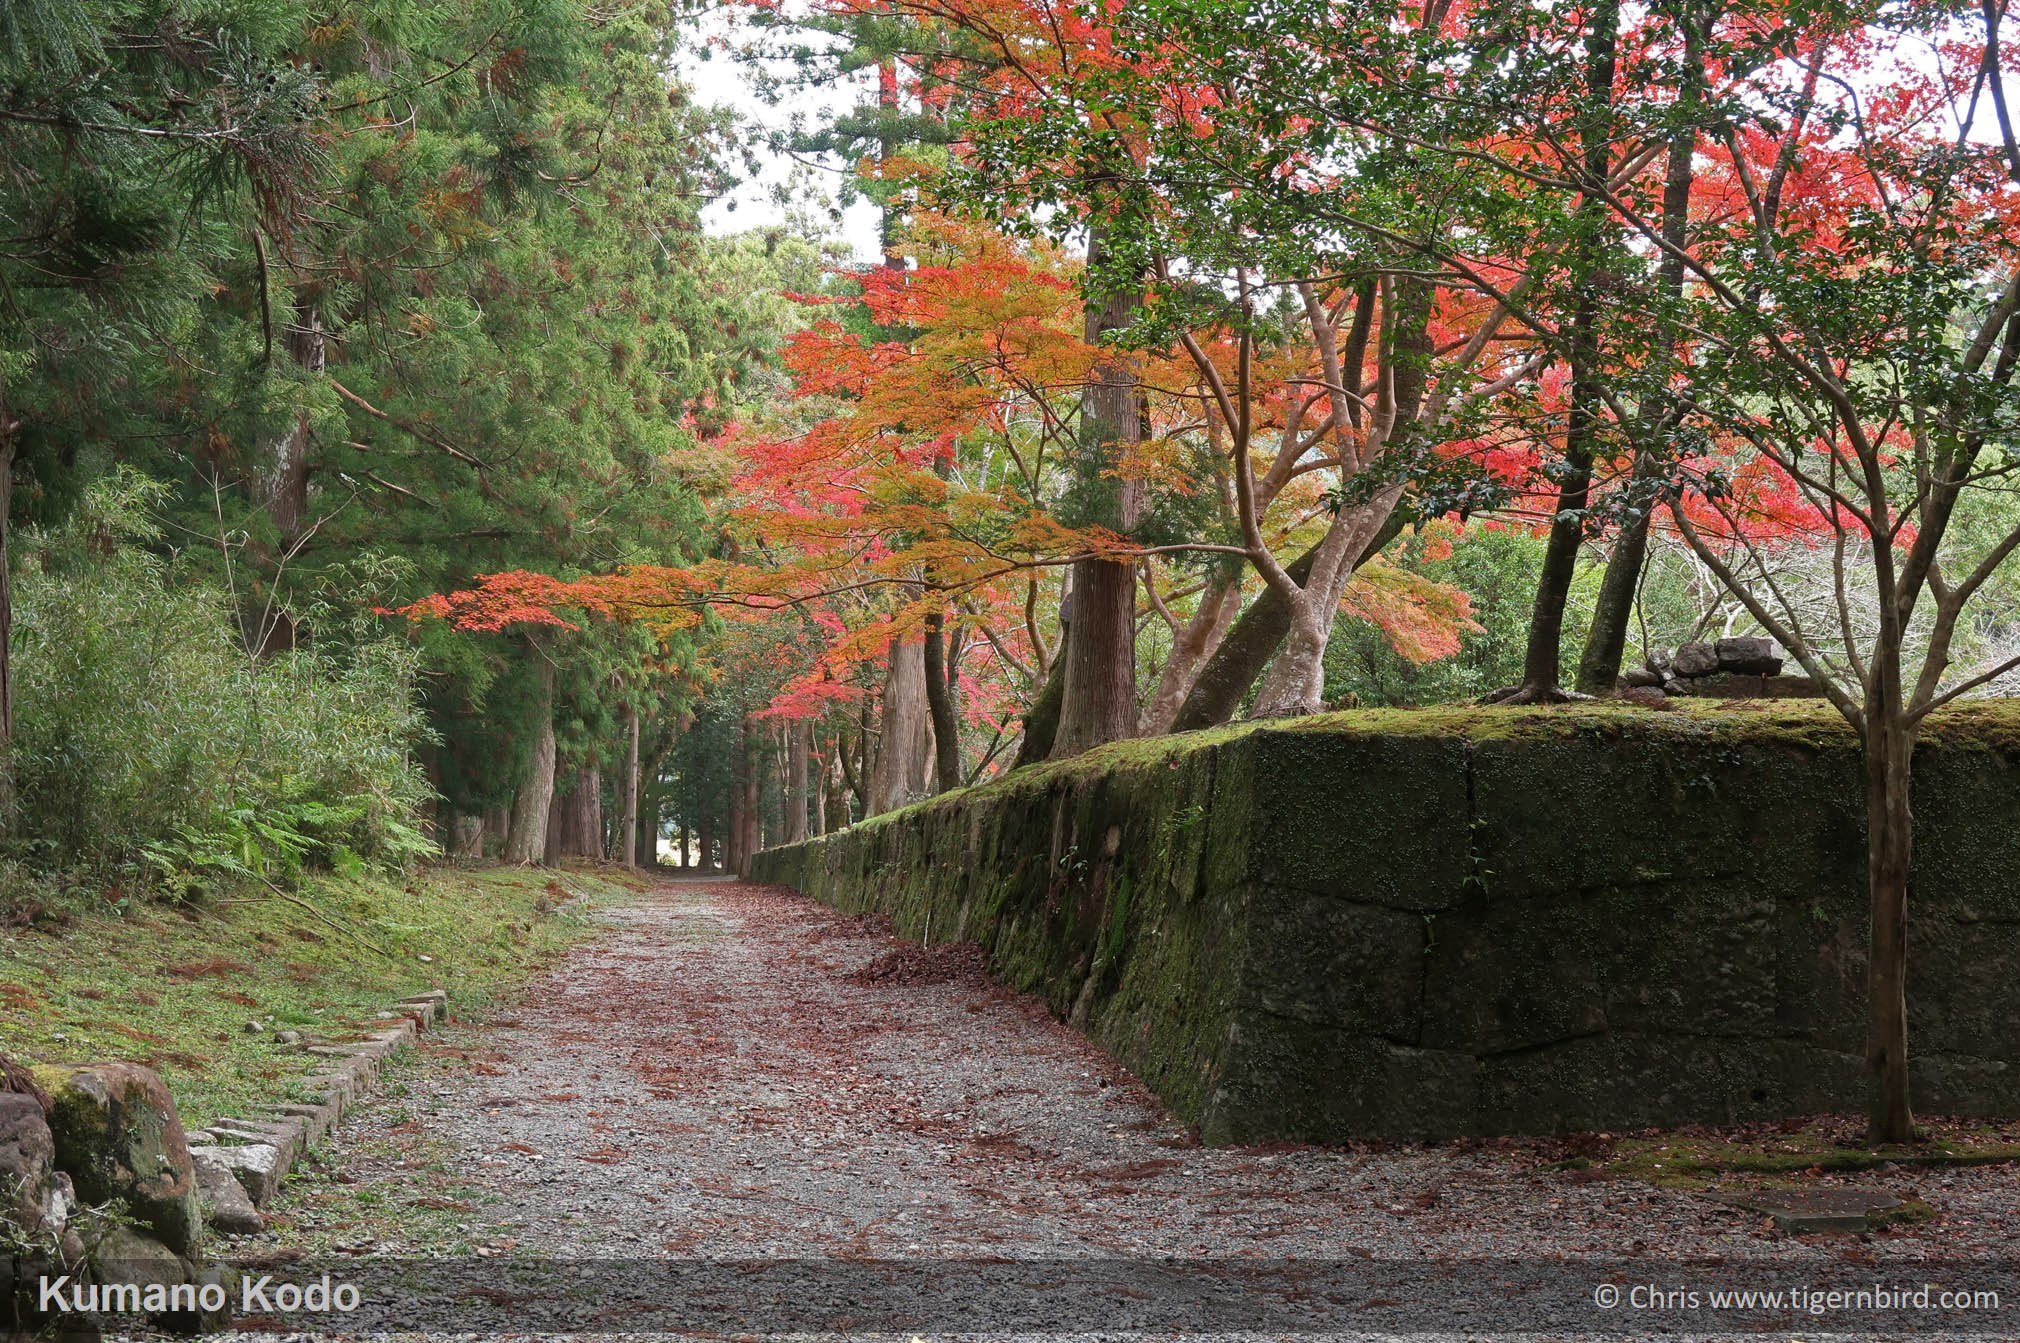 Mossy wall next to gravel trail beneath trees adorned with autumn leaves in Kumano, Japan